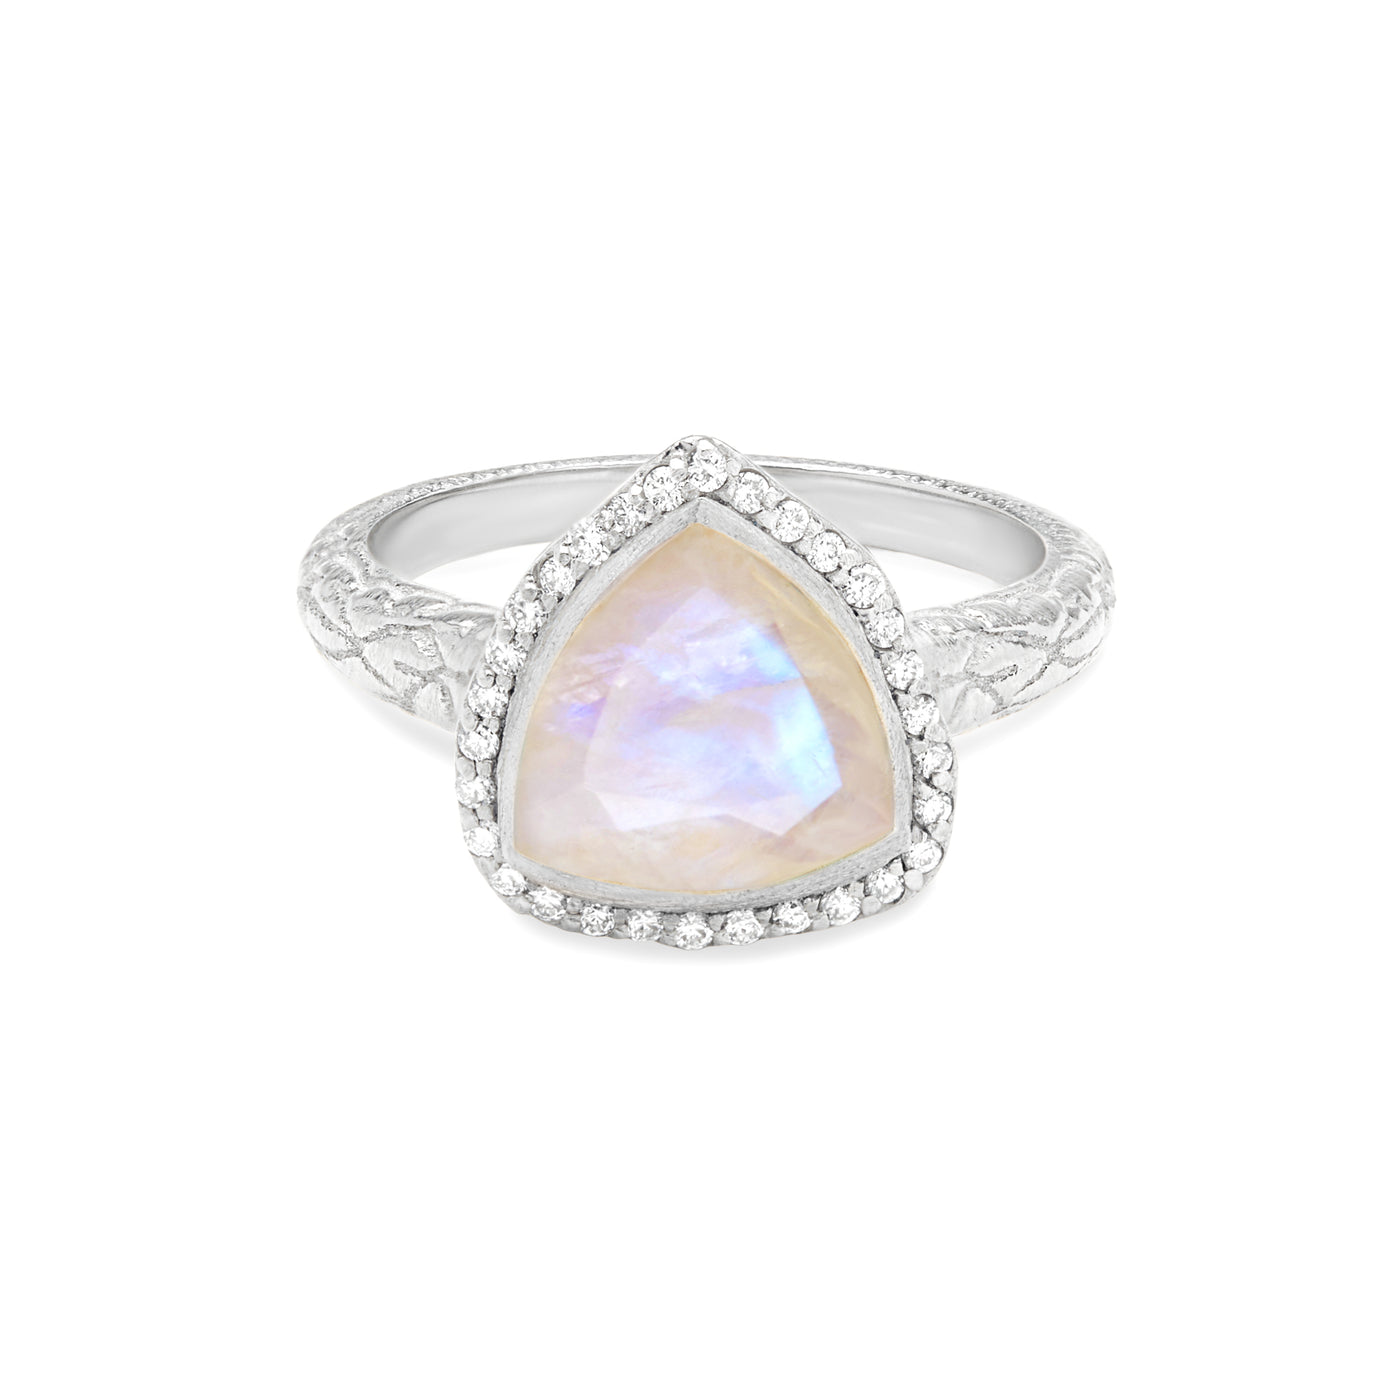 14 Karat White Gold Ring with Triangle Shaped Moonstone with Halo of White Diamonds Against White Background